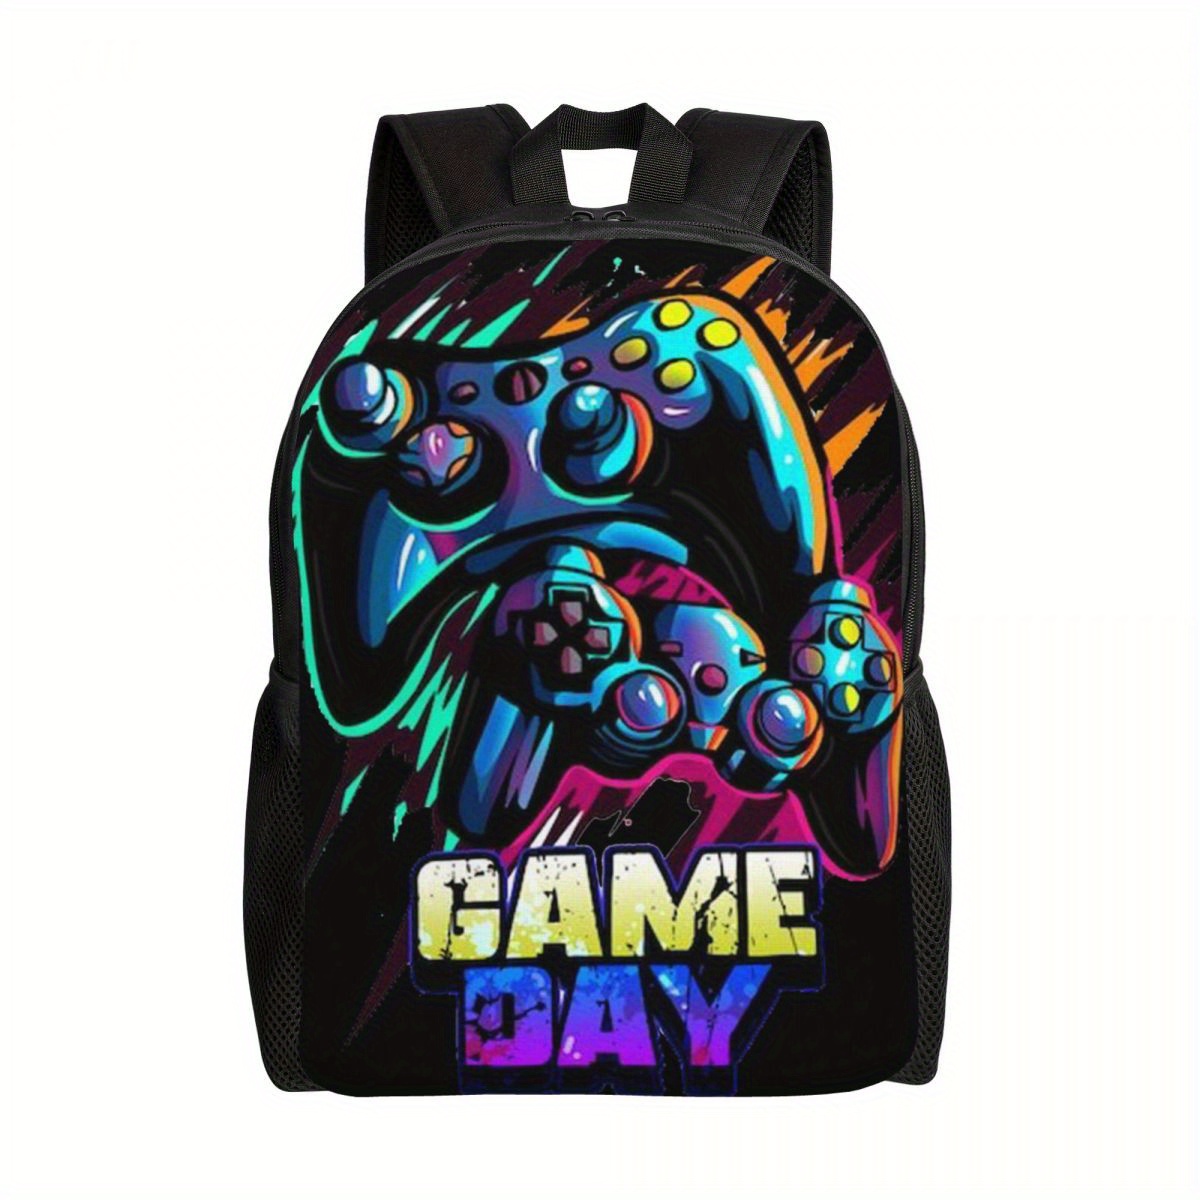 

Creative Game Controller Print Backpack, Casual Versatile Multi Functional Travel Backpack Schoolbag, Suitable For Boys Girls Teens Students